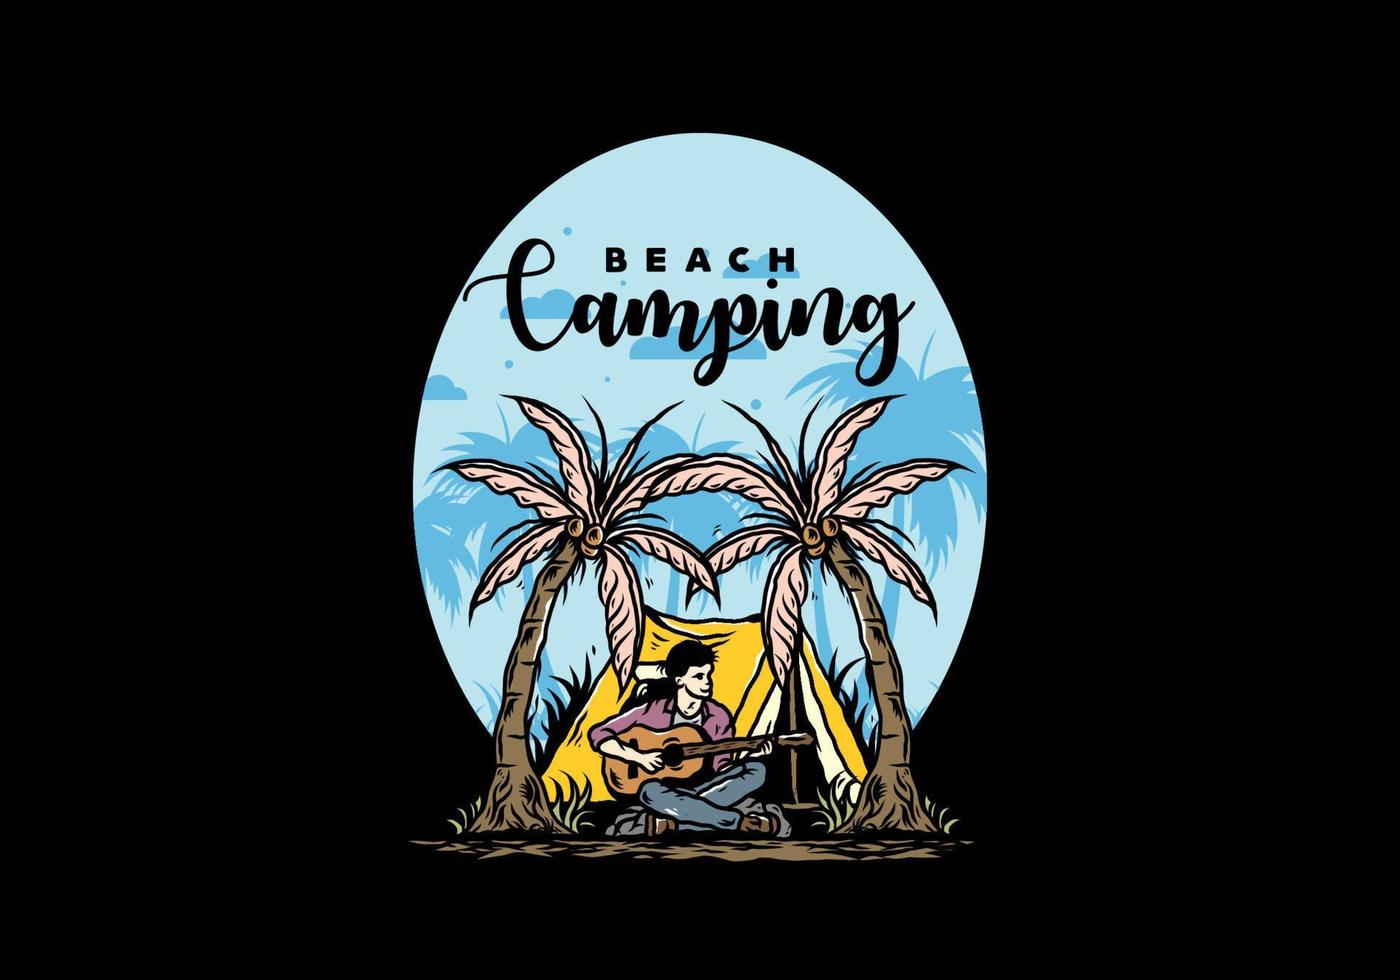 Man with guitar in front of tent between coconut tree illustration vector